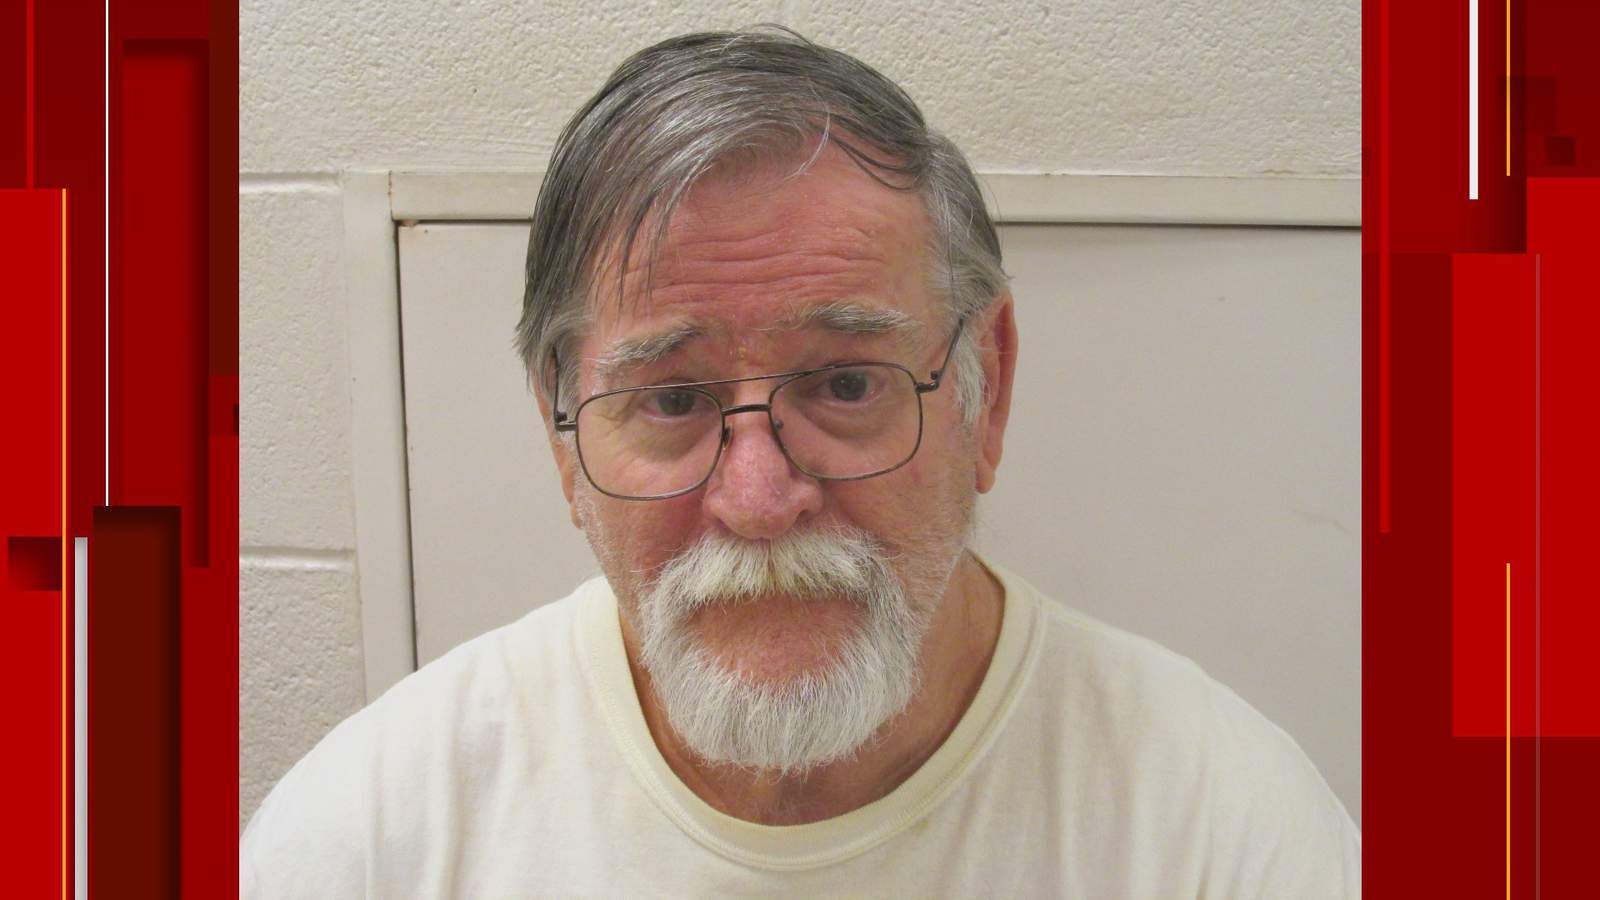 72-year-old Wythe County man admits to possession, distribution of child pornography